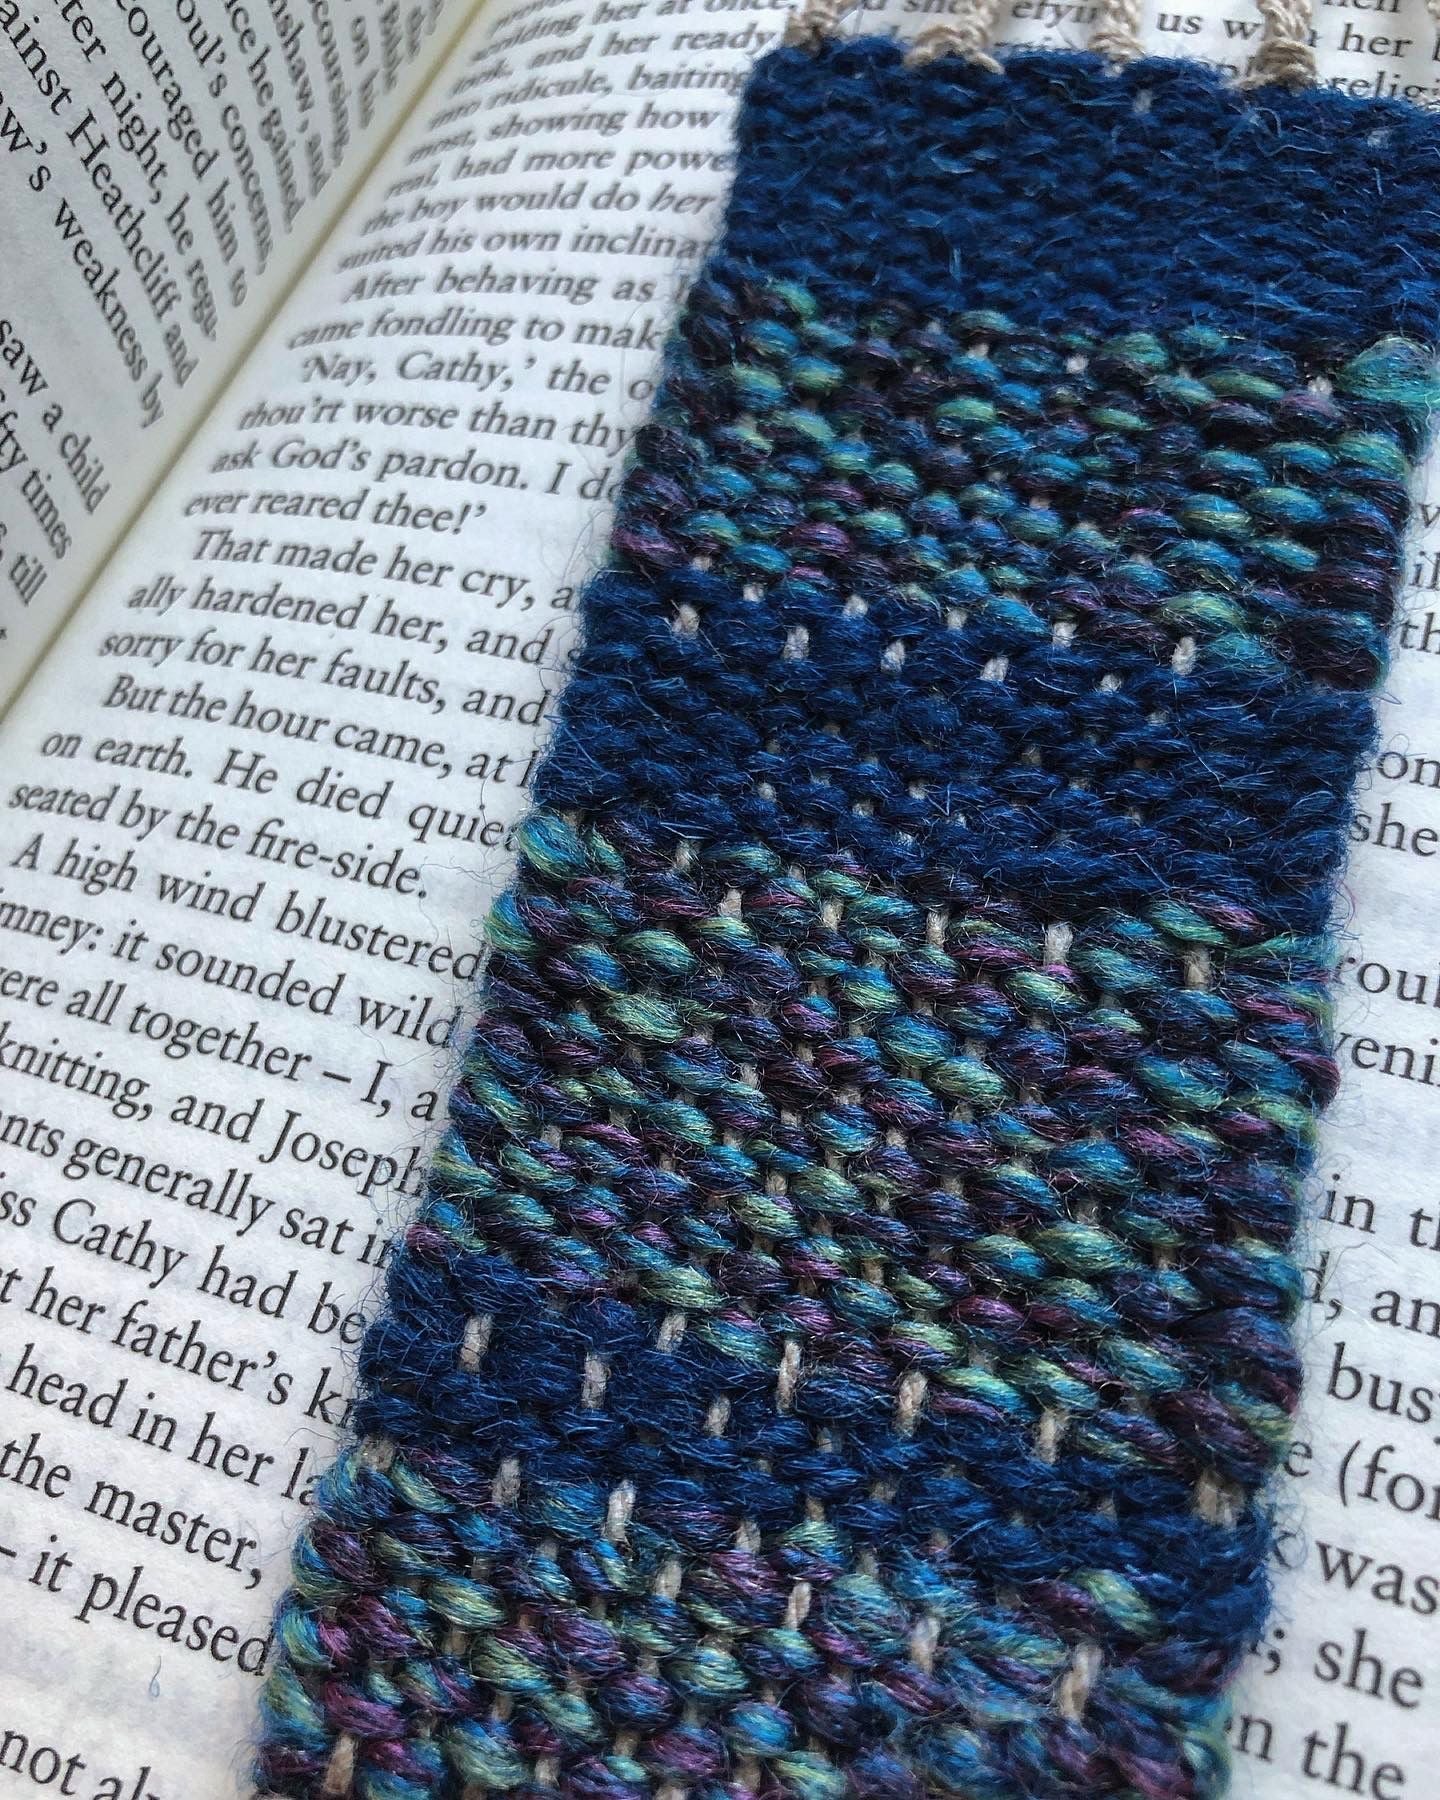 Woven Bookmarks - 2